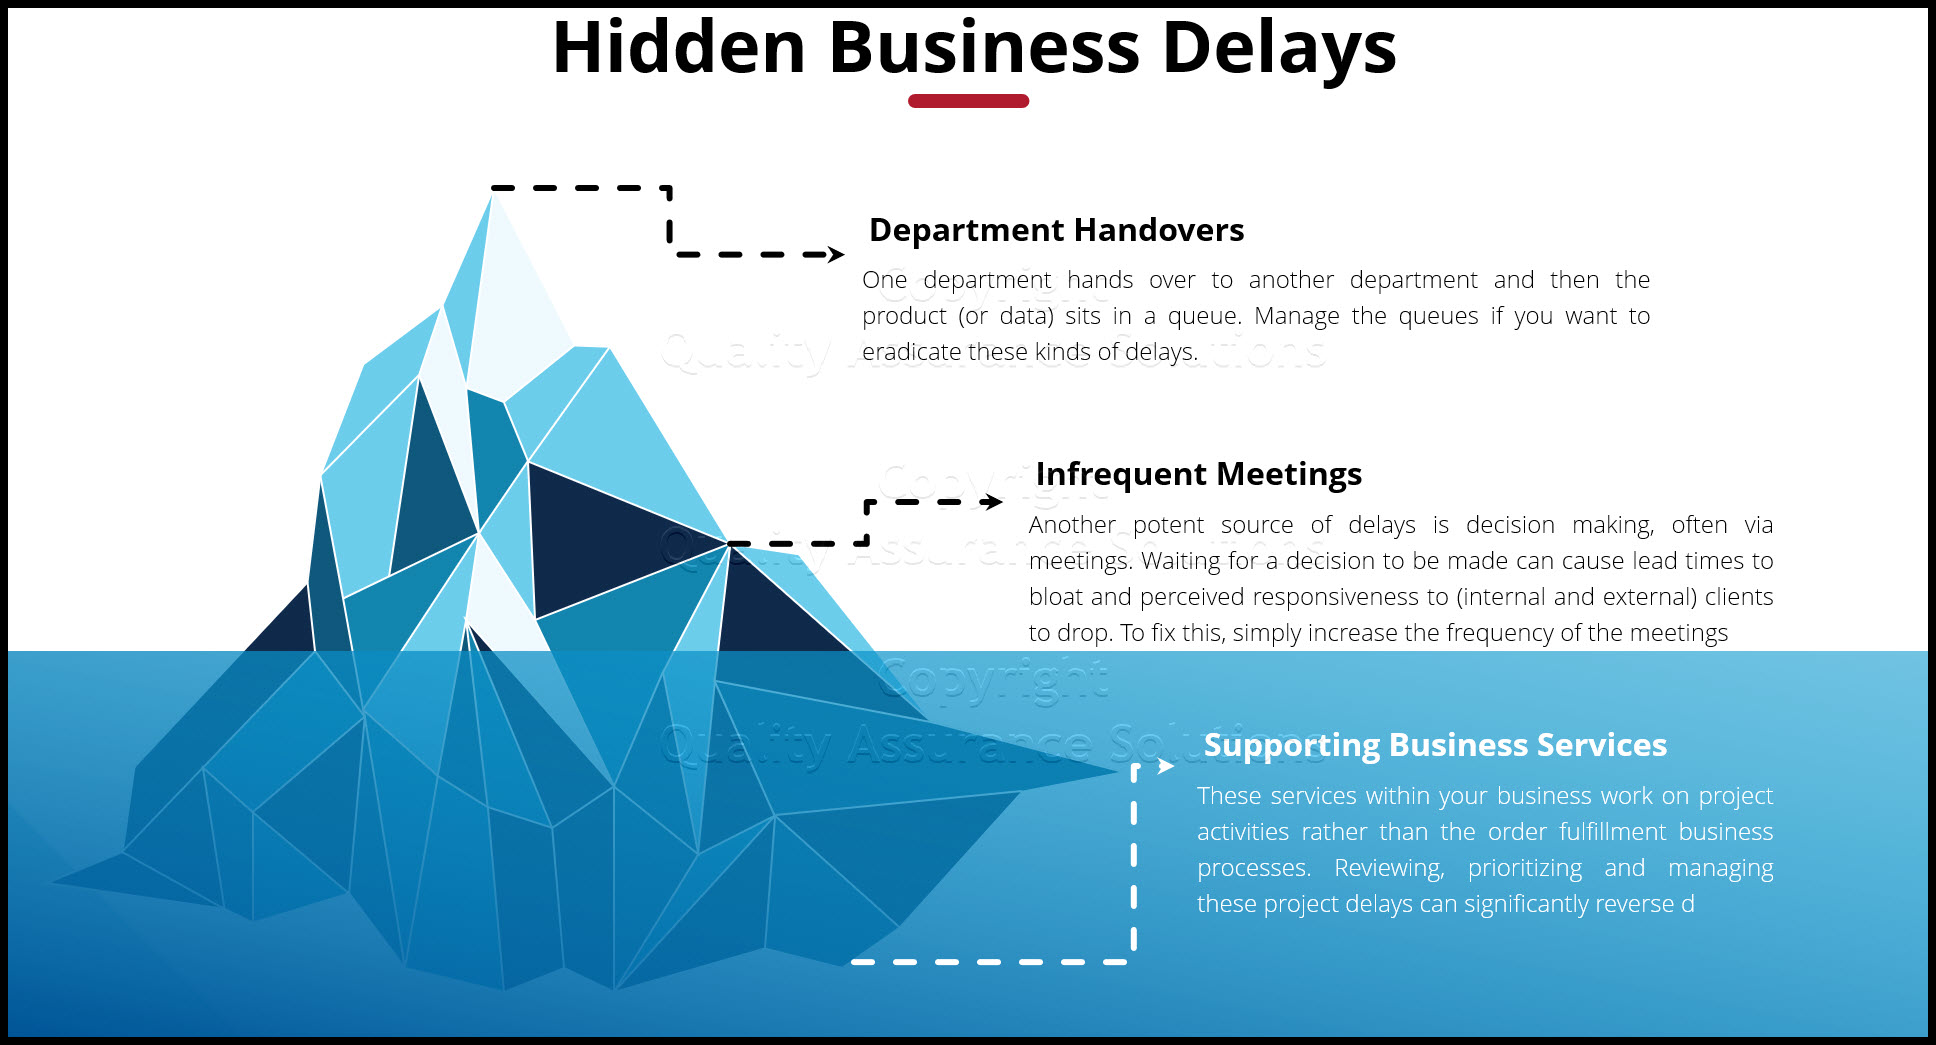 To improve project delays, you need to take action to reverse delay and elimintate this type of waste.  